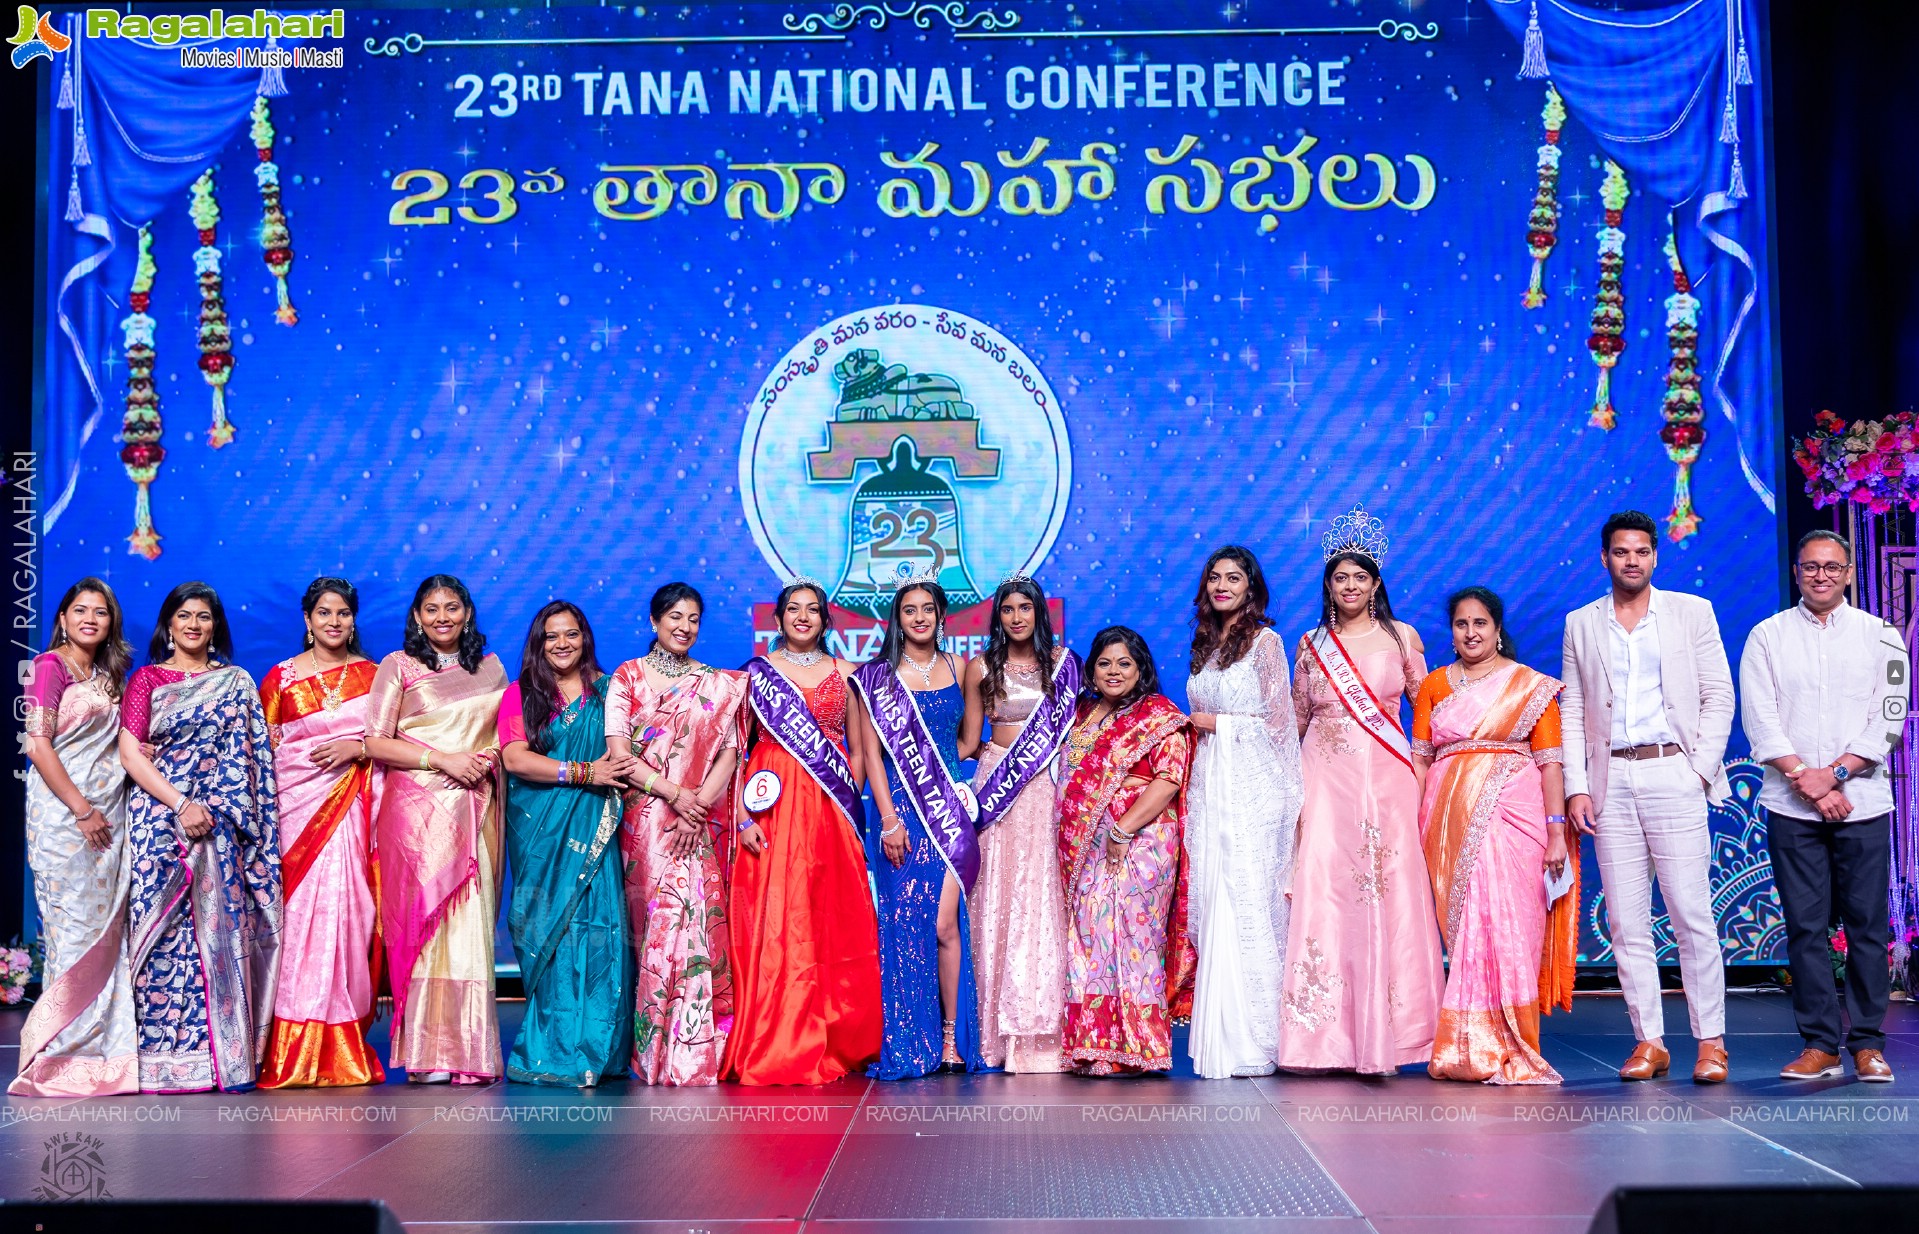 DhimTANA final competitions at 23rd TANA Conference, Philadelphia